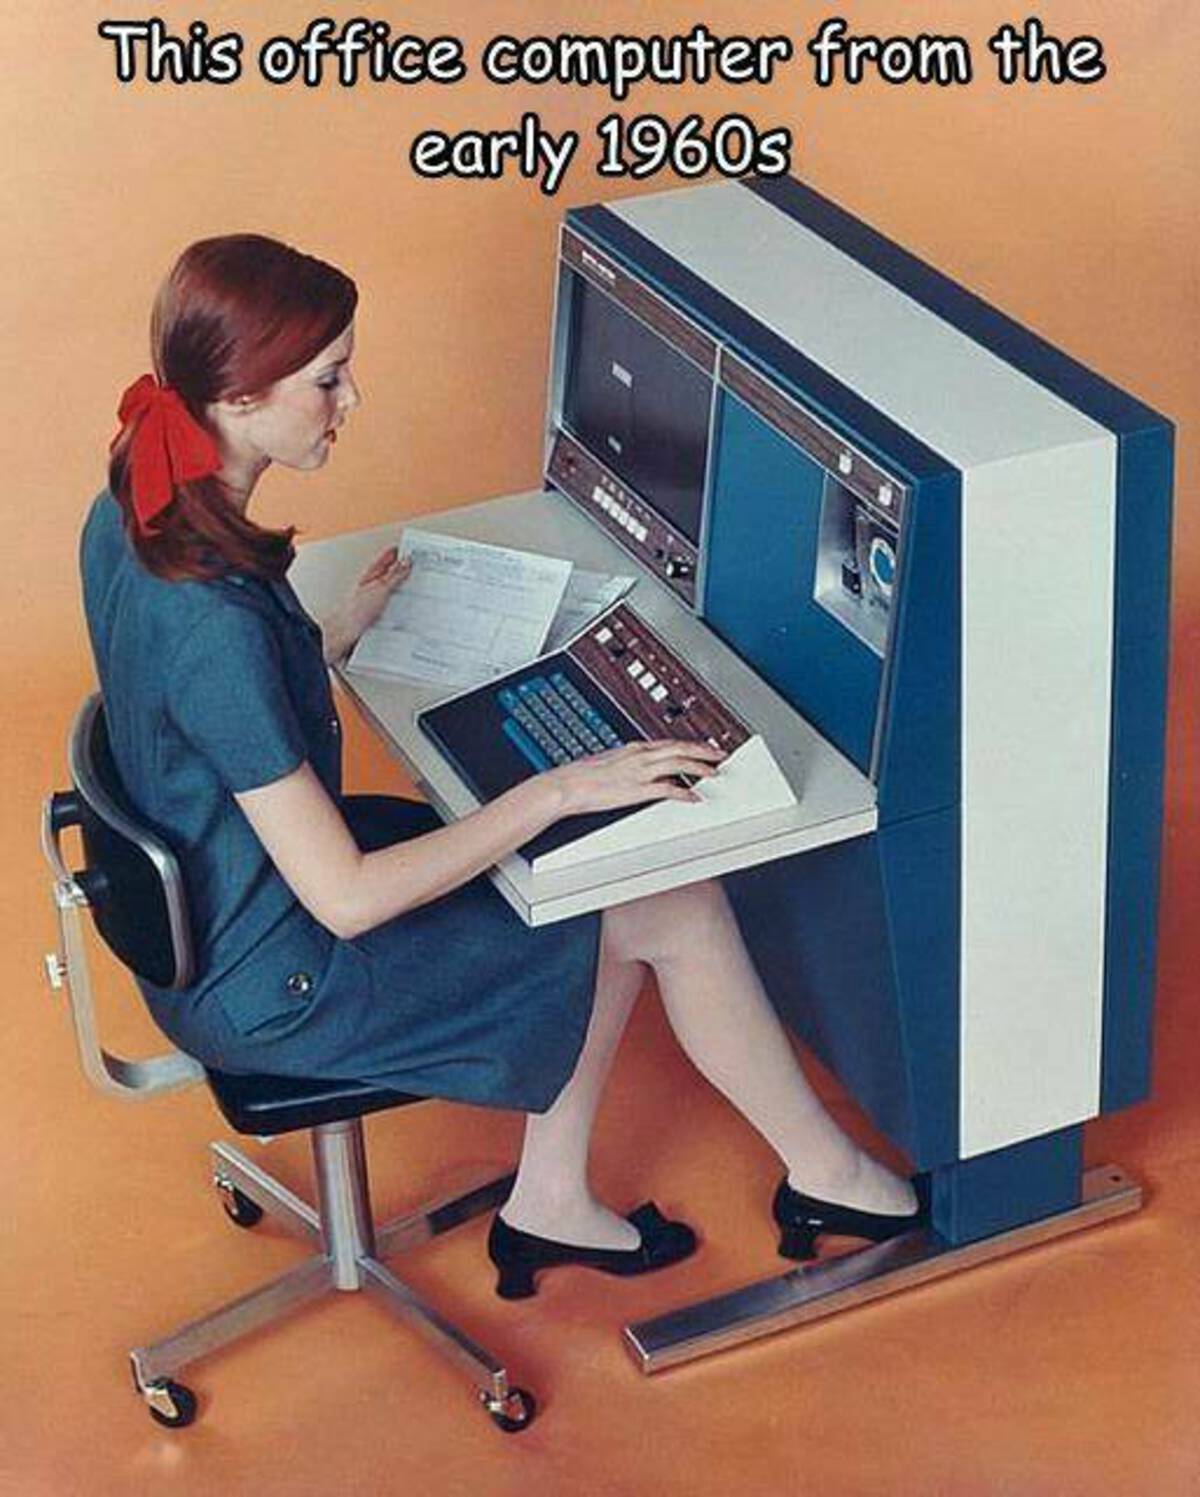 1970s computers - This office computer from the early 1960s Sessss